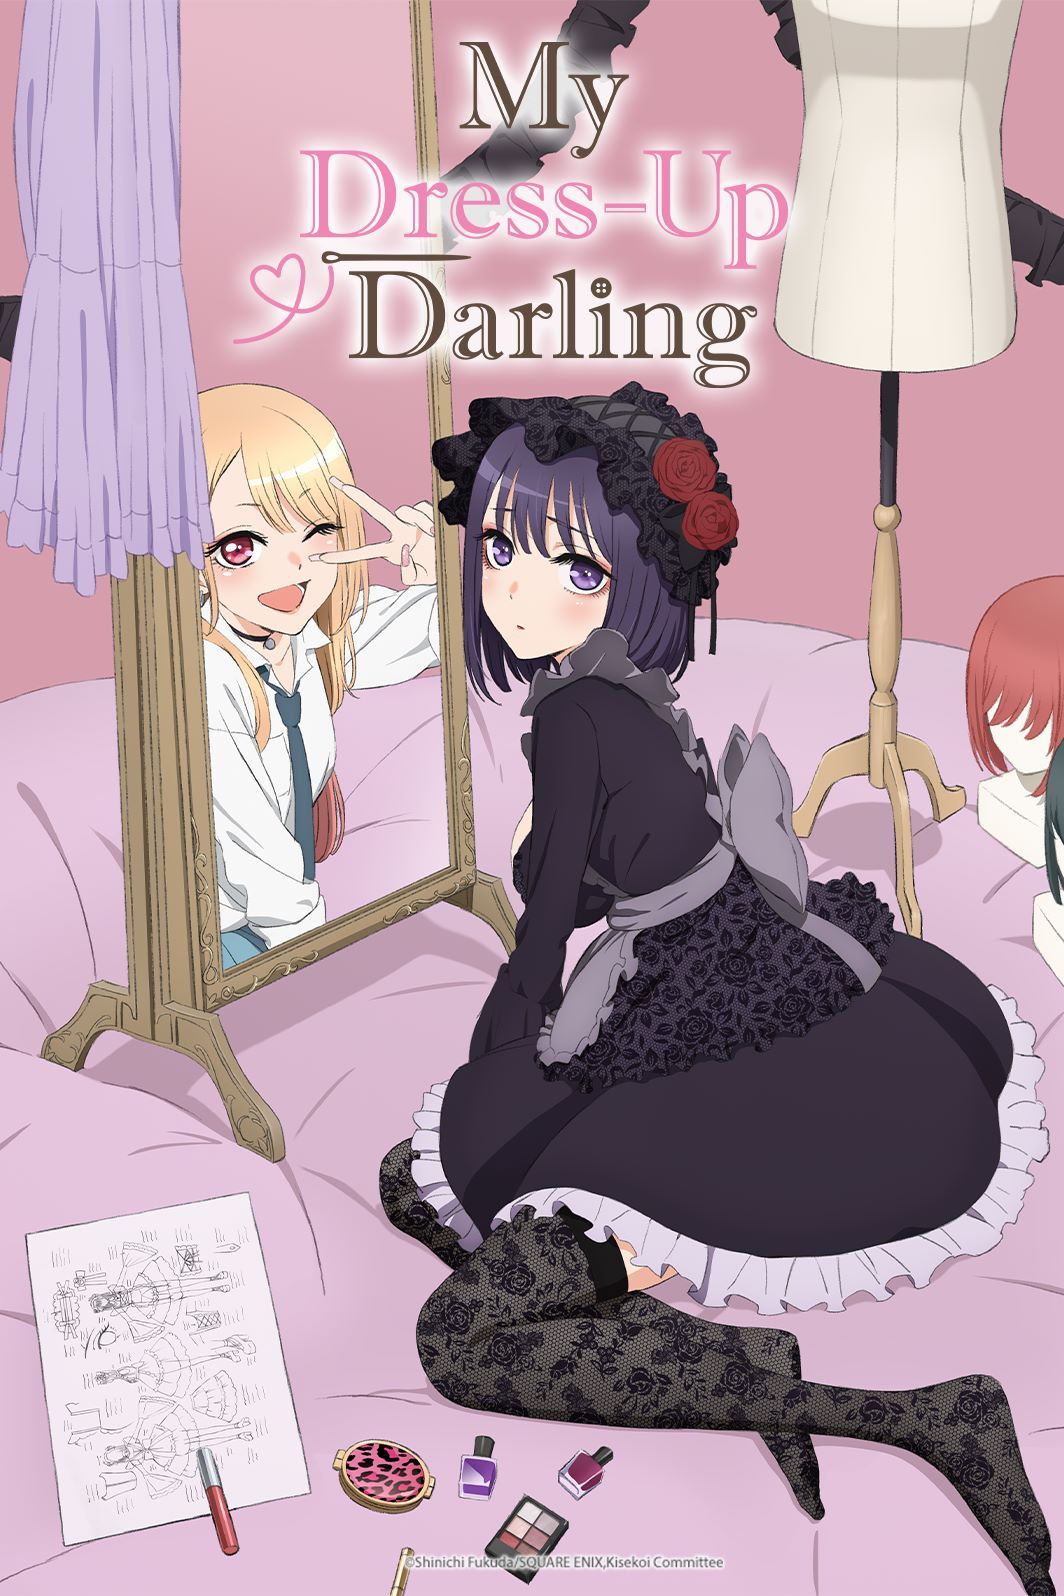 My Dress Up Darling Episode 2 Live Stream Details How To Watch Online Spoilers Ibtimes